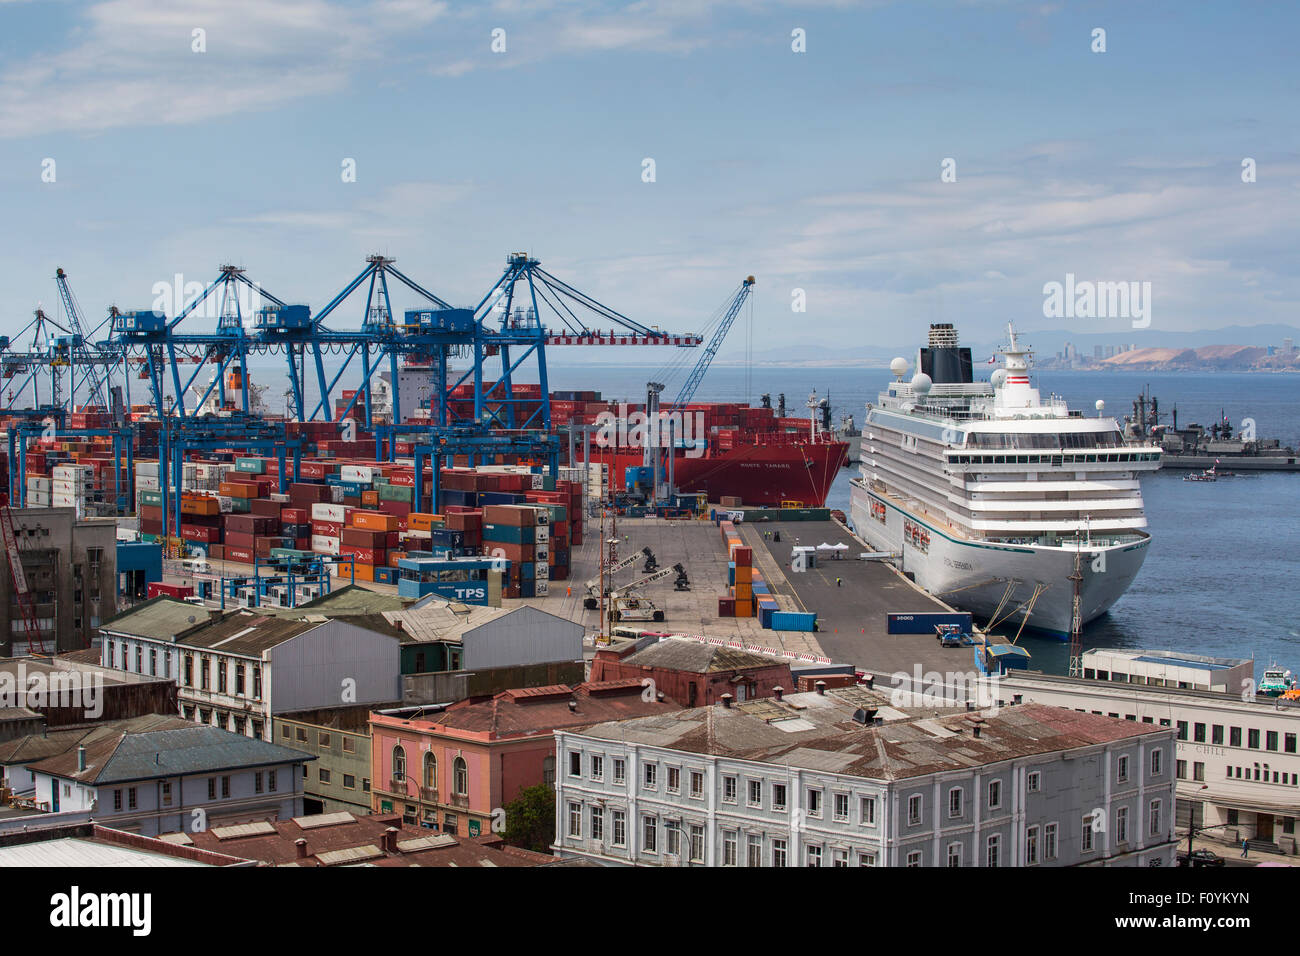 Cruise ship and naval vessel, Valparaiso, Chile Stock Photo